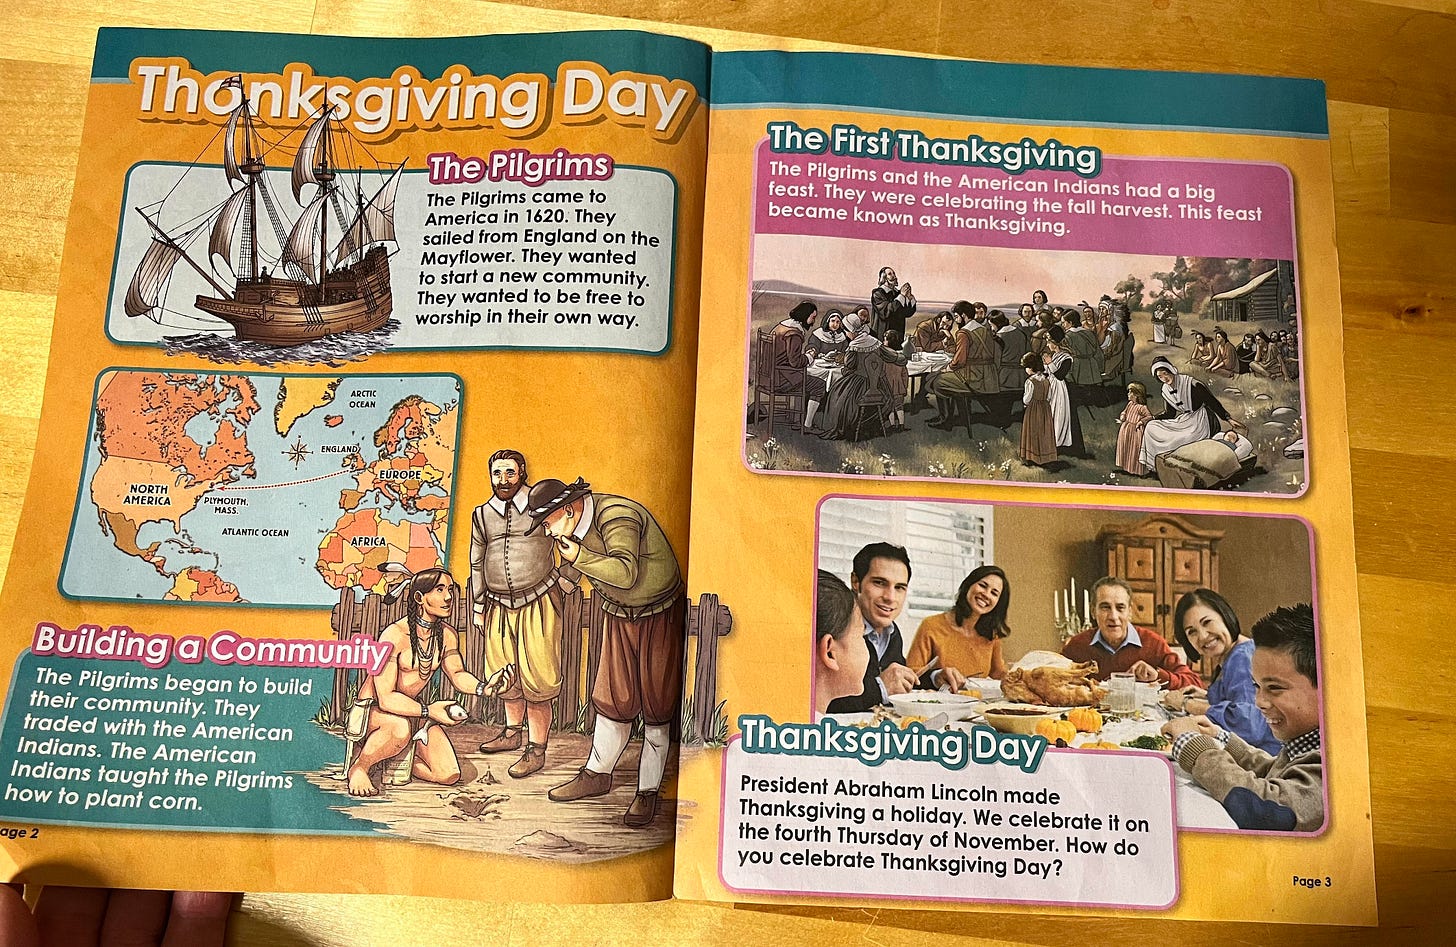 Thanksgiving day explained in pictures - no mention of any slaughter, just the pilgrims arriving and building a “community” then sharing some food with Native Americans